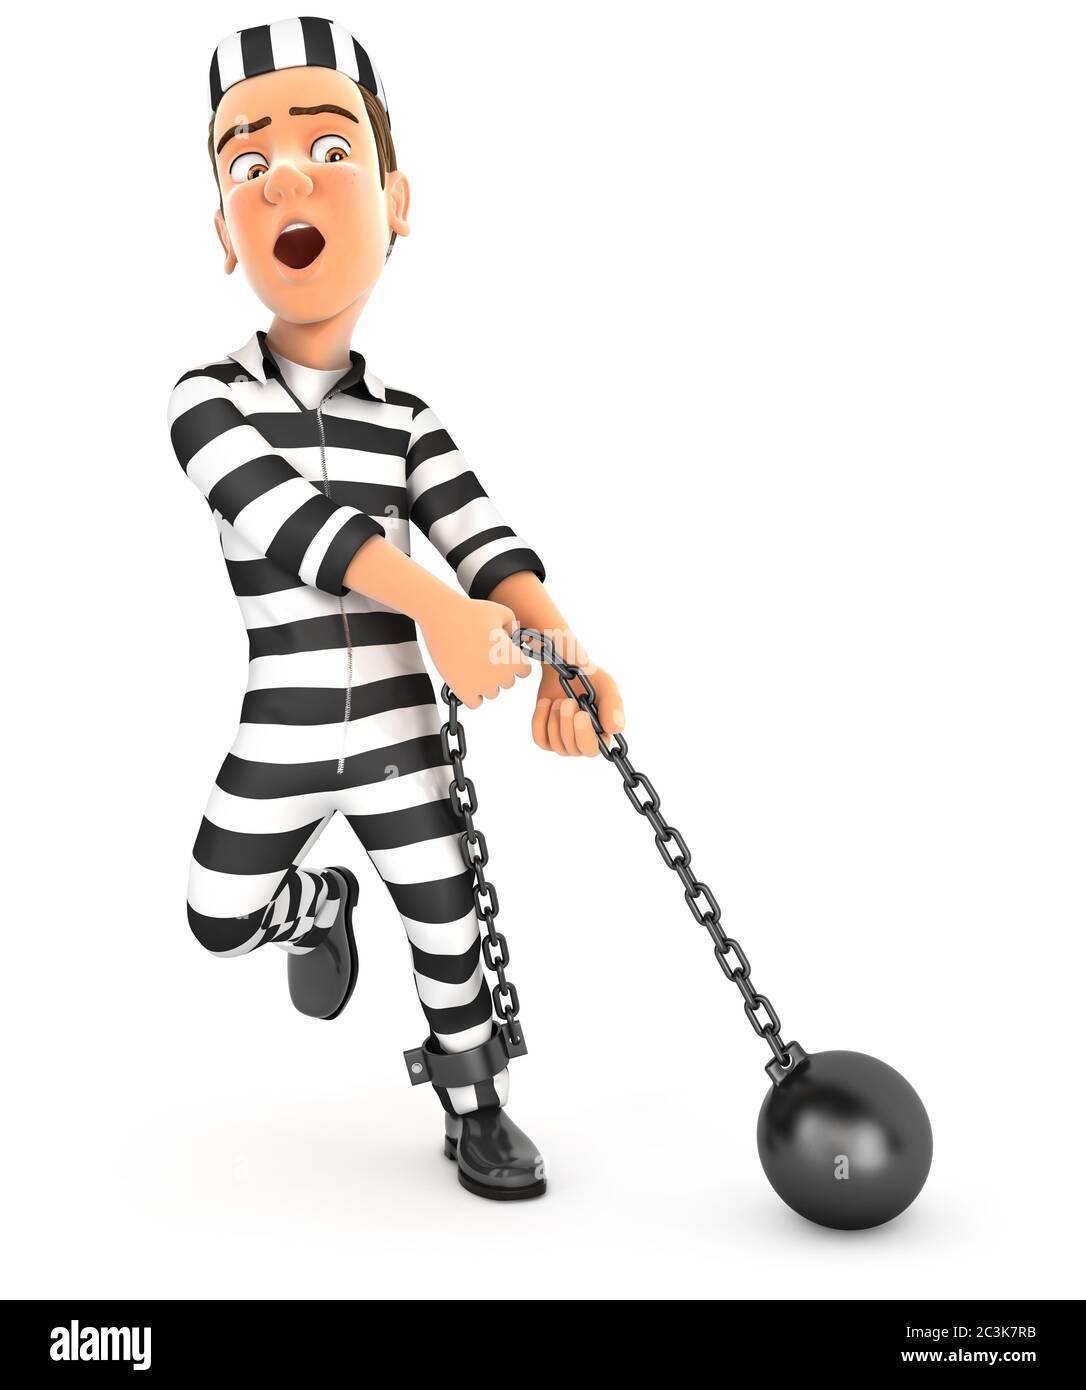 3d convict trying to lift ball and chain, illustration with isolated white background Stock Photo